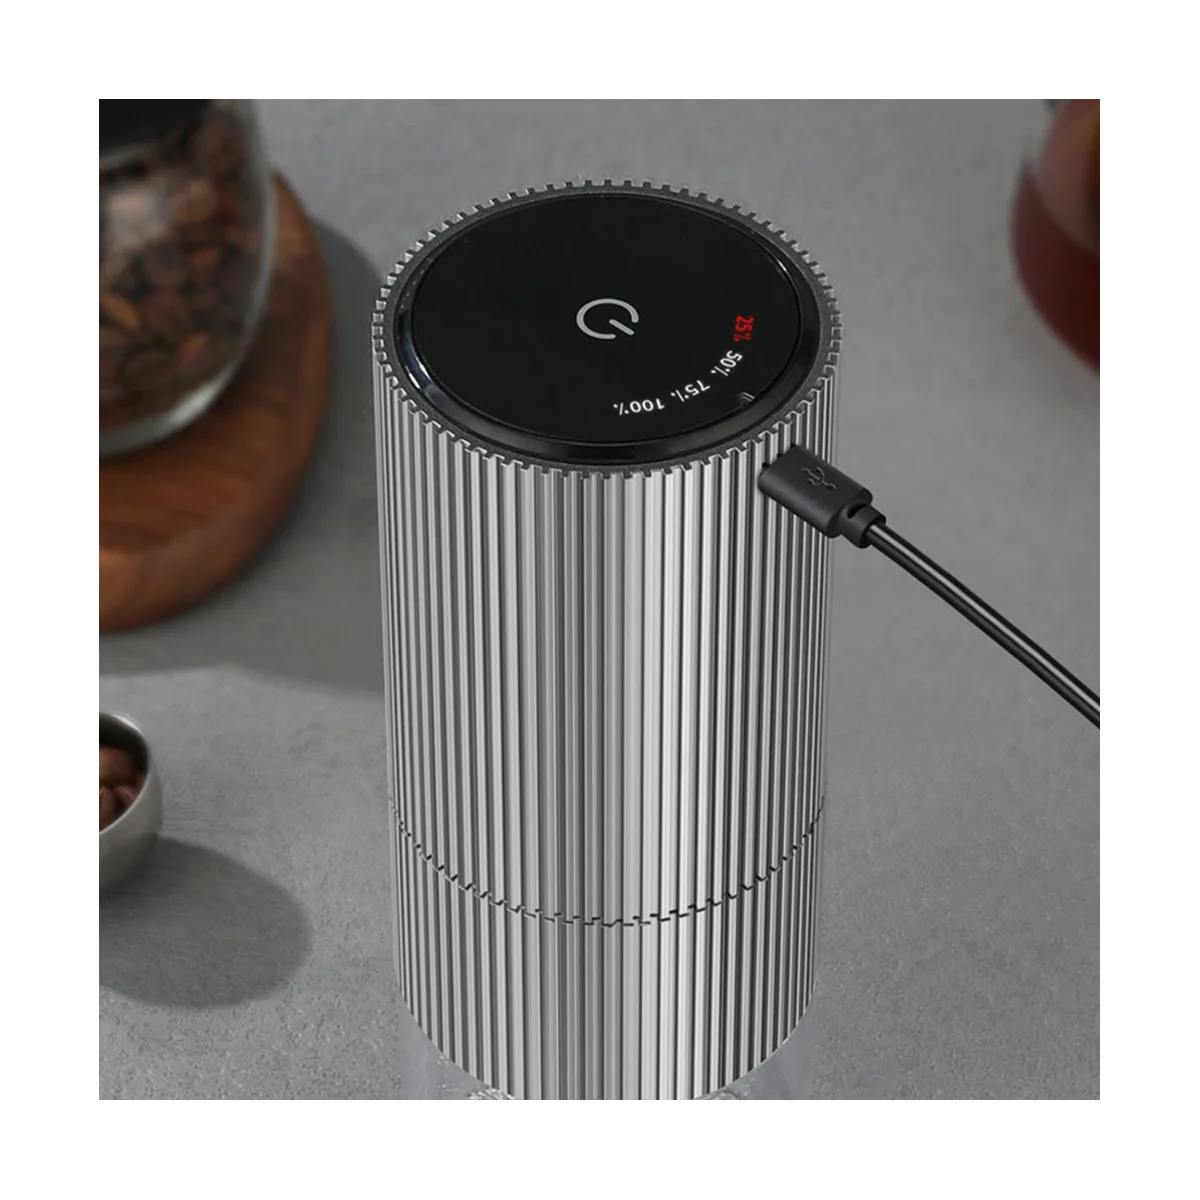 

Electric Coffee Grinder Automatic Coffee Beans Spice Mill Espresso Coffee Machine Maker USB Charger Grinder Black